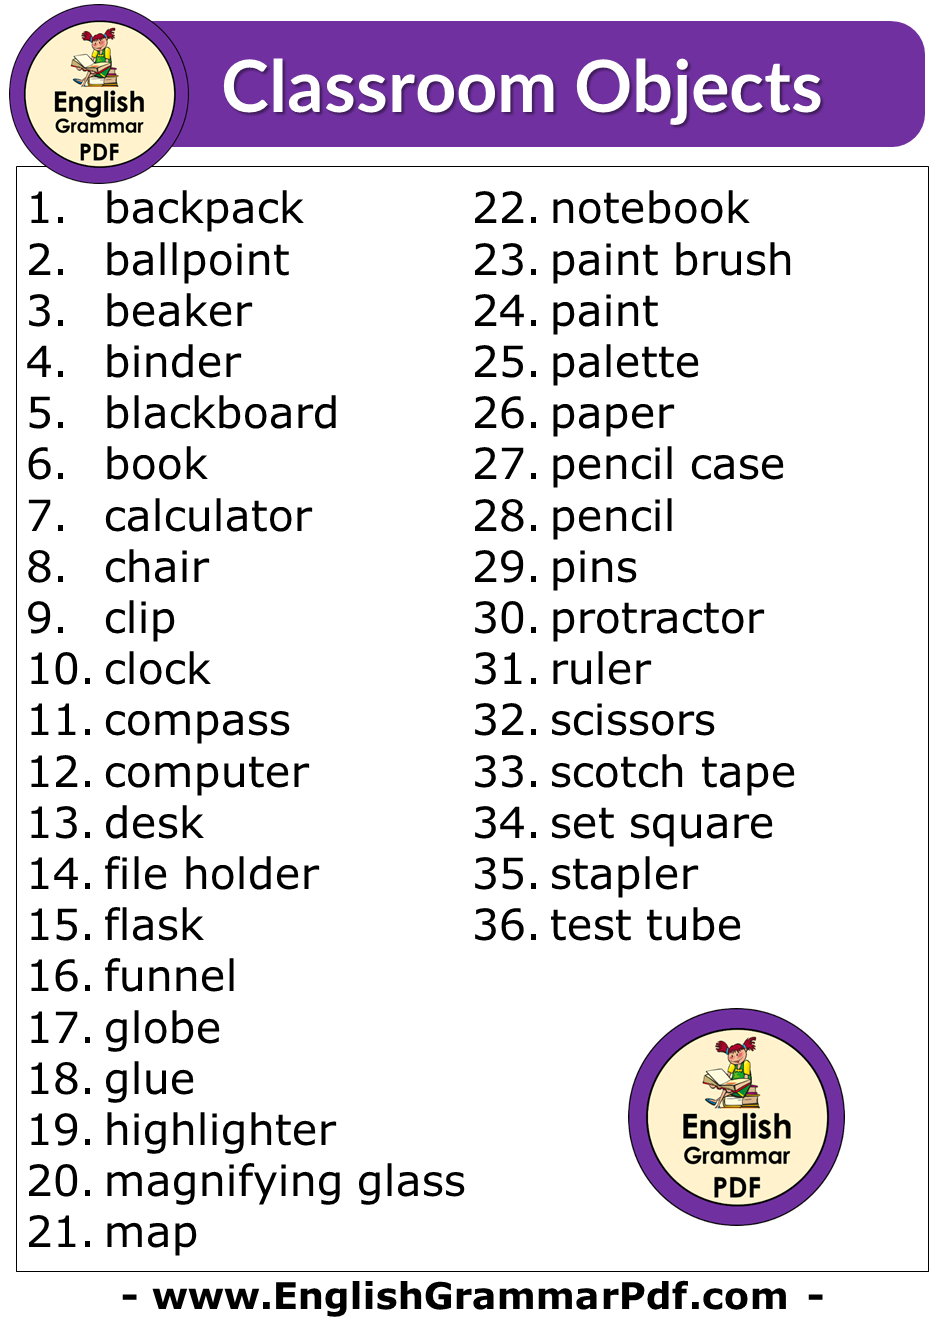 List of Classroom Objects in English